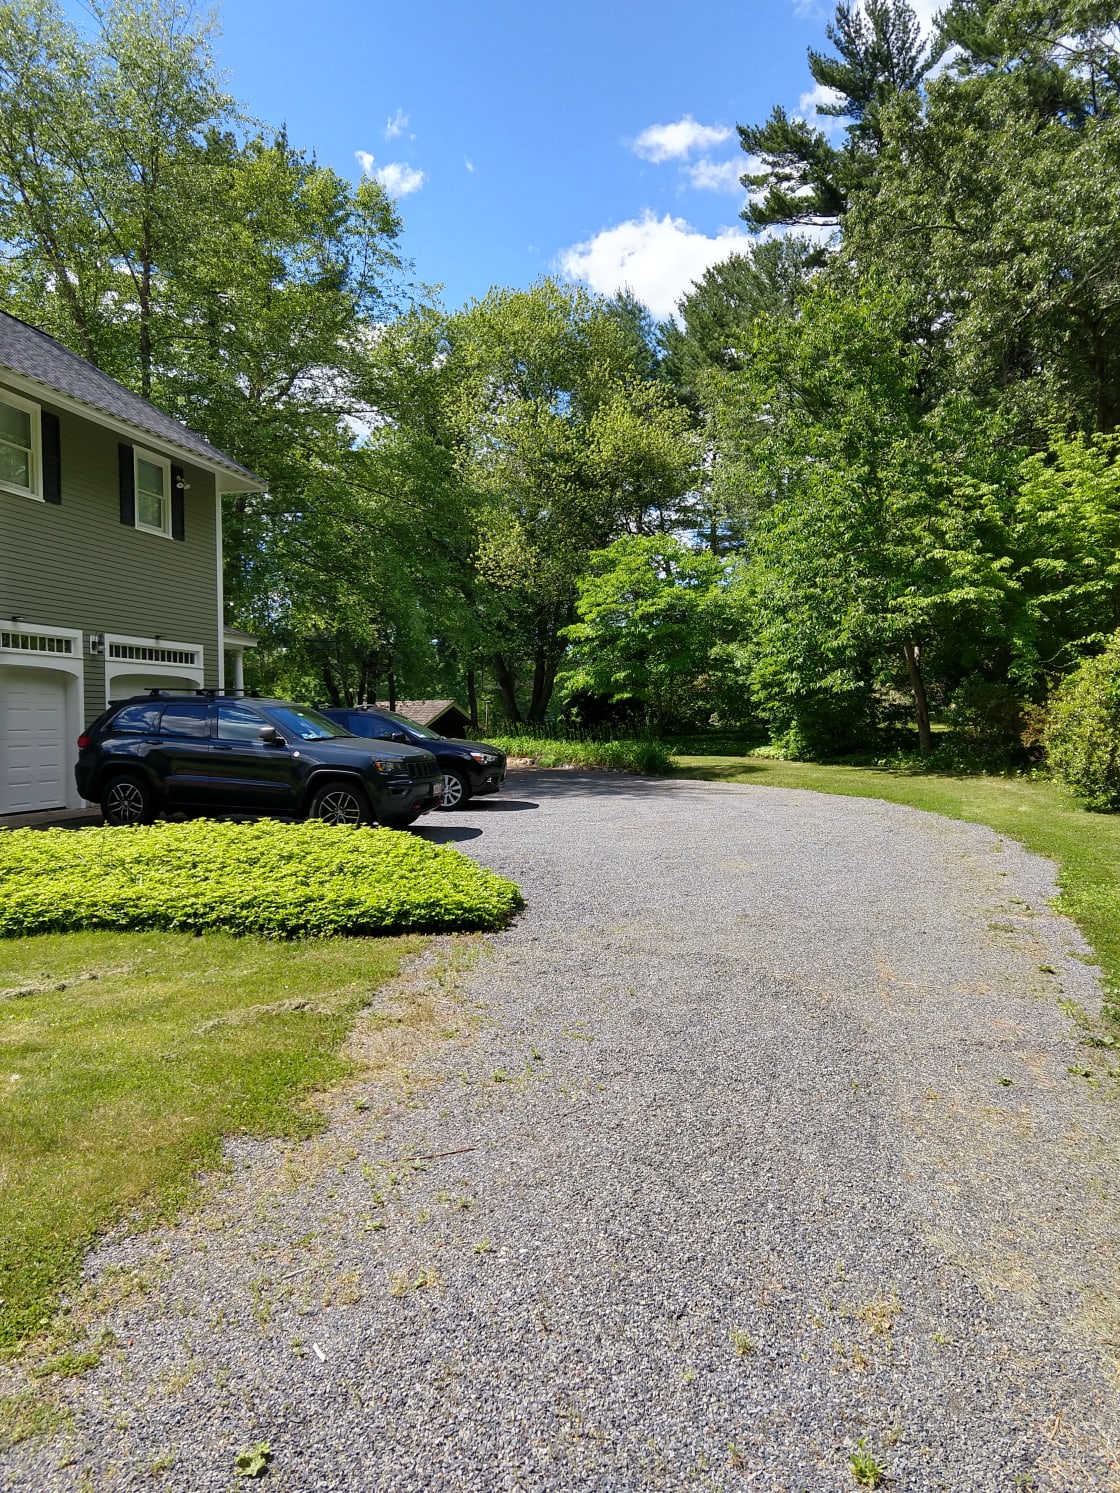 just an idea of the driveway